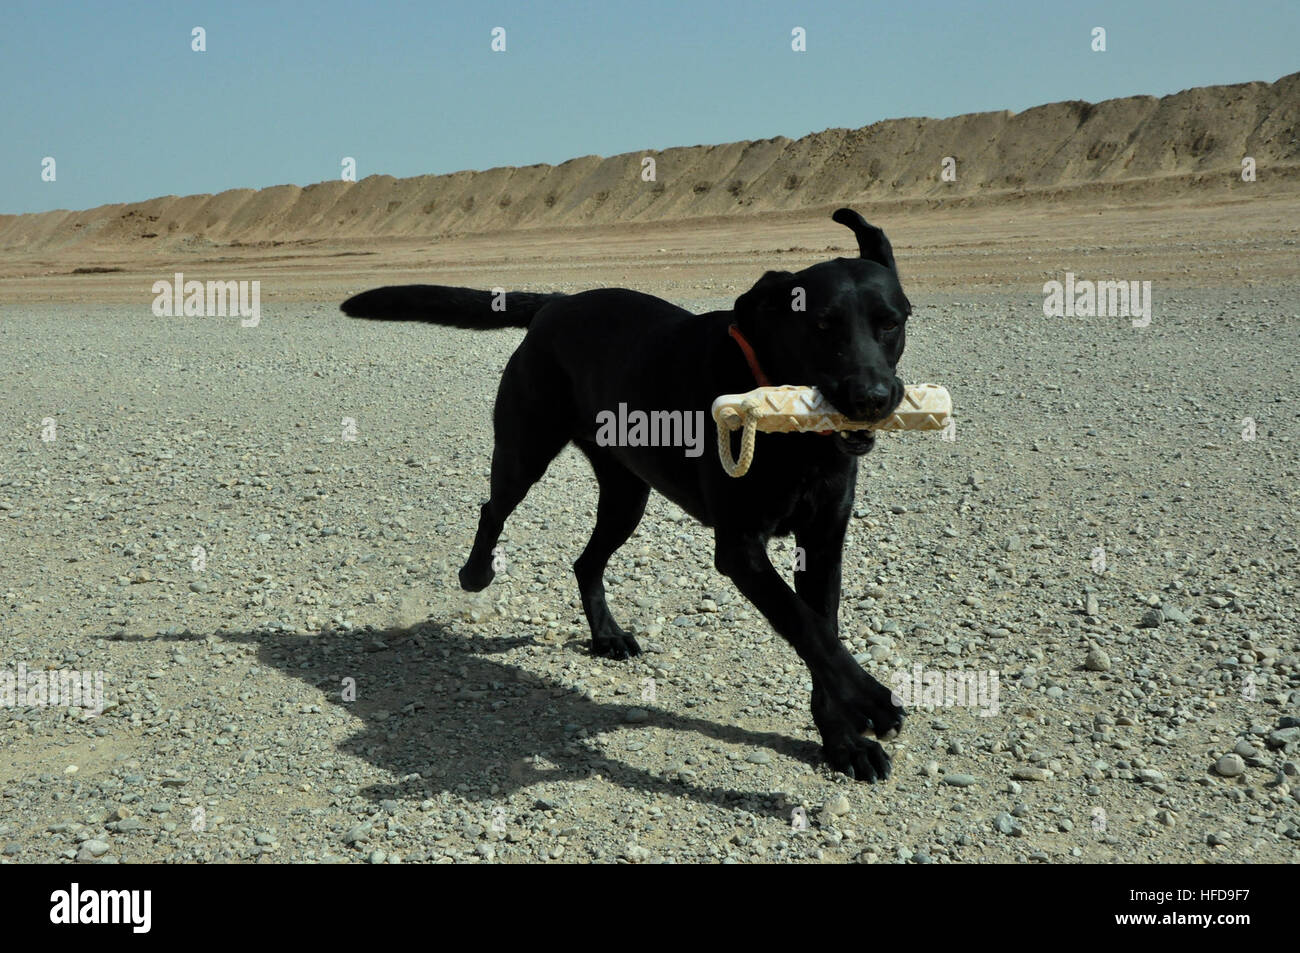 Allie, a black Labrador Retriever trained to find hidden bombs and explosive material, returns a Kong dog toy after it was tossed. The toy is the dog's prized possession. Allie and her civilian handler, Chad O'Brien, spent part of an afternoon playing fetch in an large sandy area on Camp Leatherneck, Afghanistan, with the toy, part of an exercise program the handlers follow with their dogs between missions. Getting to put that toy in his mouth means victory for the dog and signals a job well done. The dogs of war, saving lives but paying the price 120404-N-UR169-421 Stock Photo